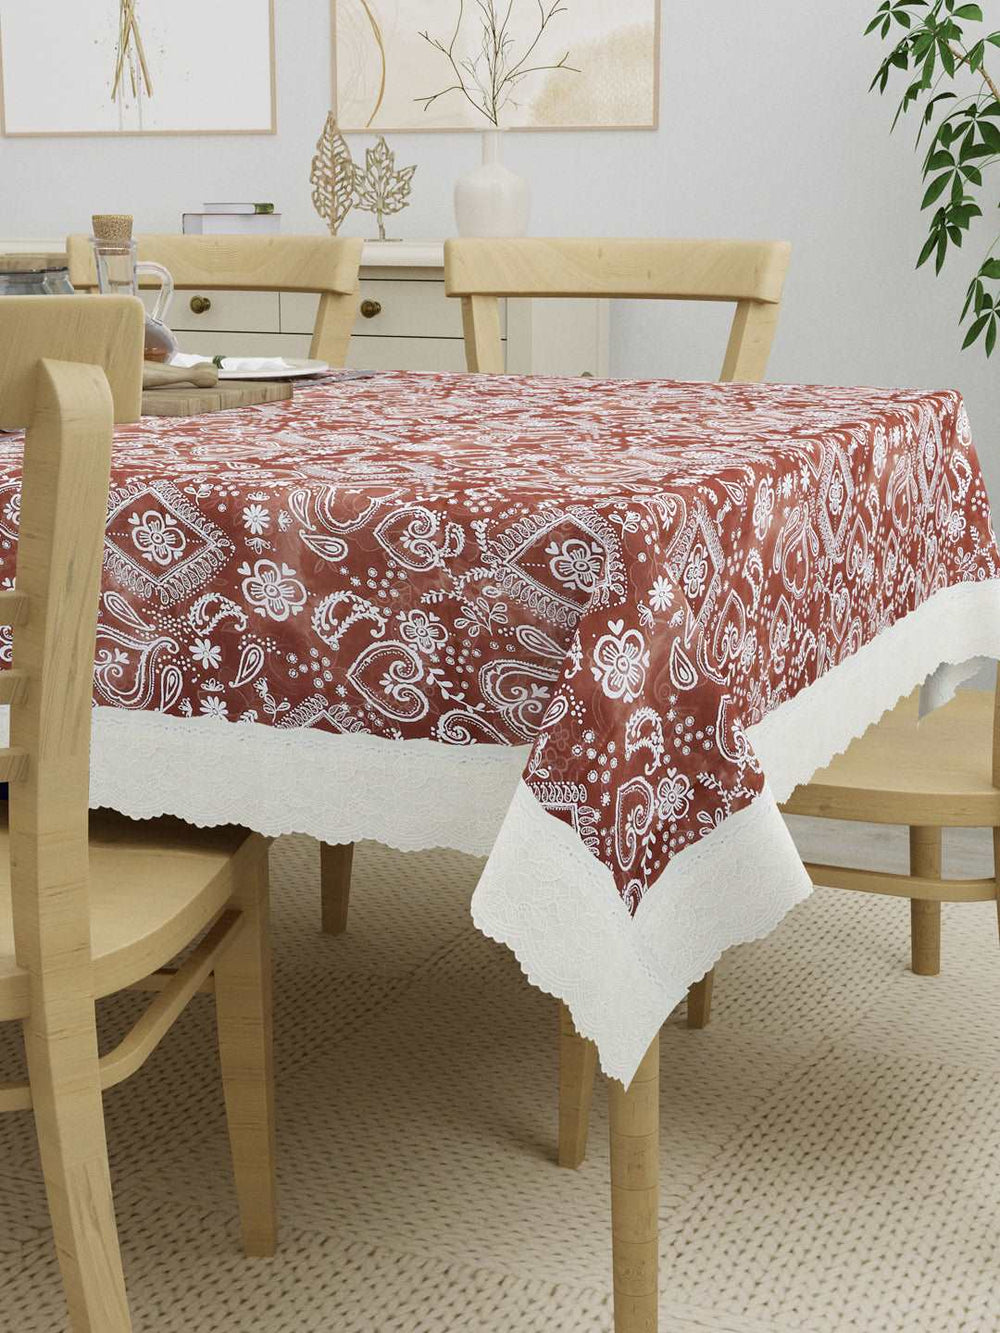 6 Seater Dining Table Cover; Material - PVC; Anti Slip; White Print On Brown